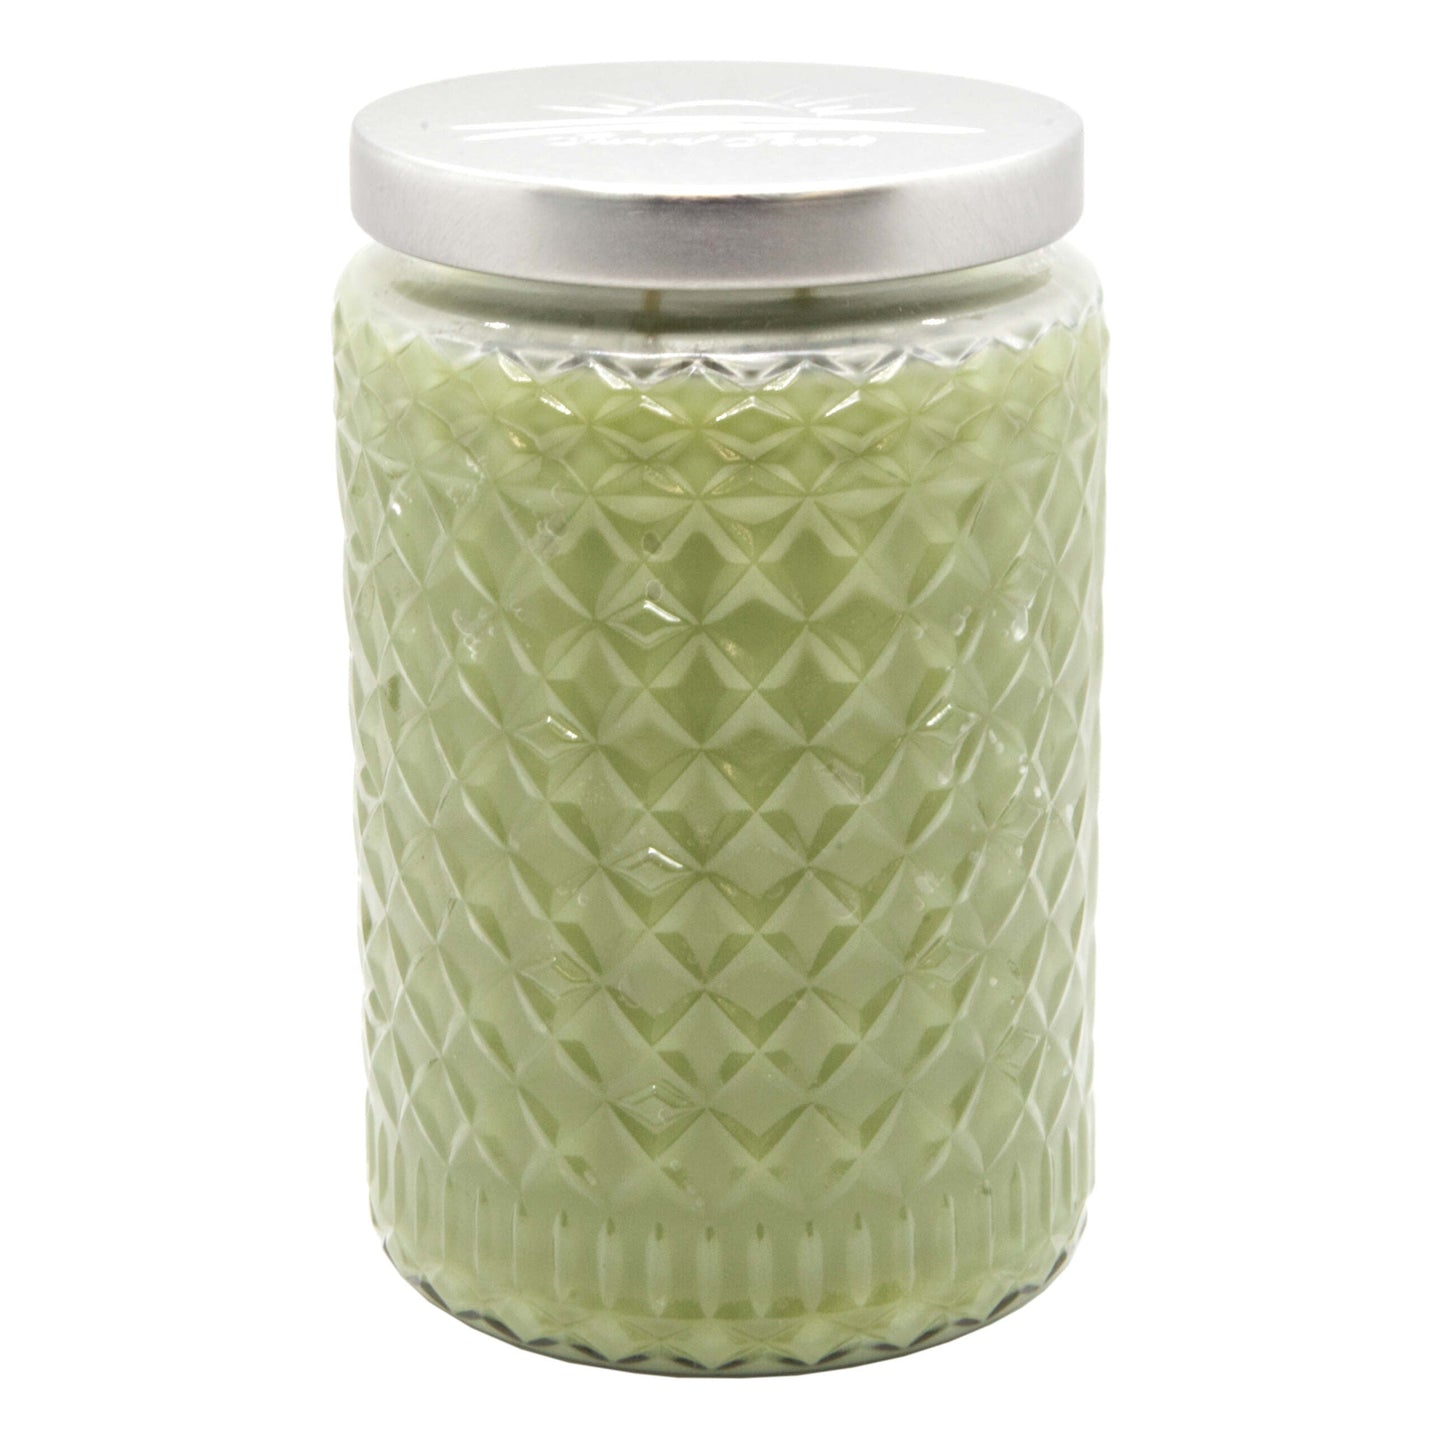 Fruit Basket Scented Candle